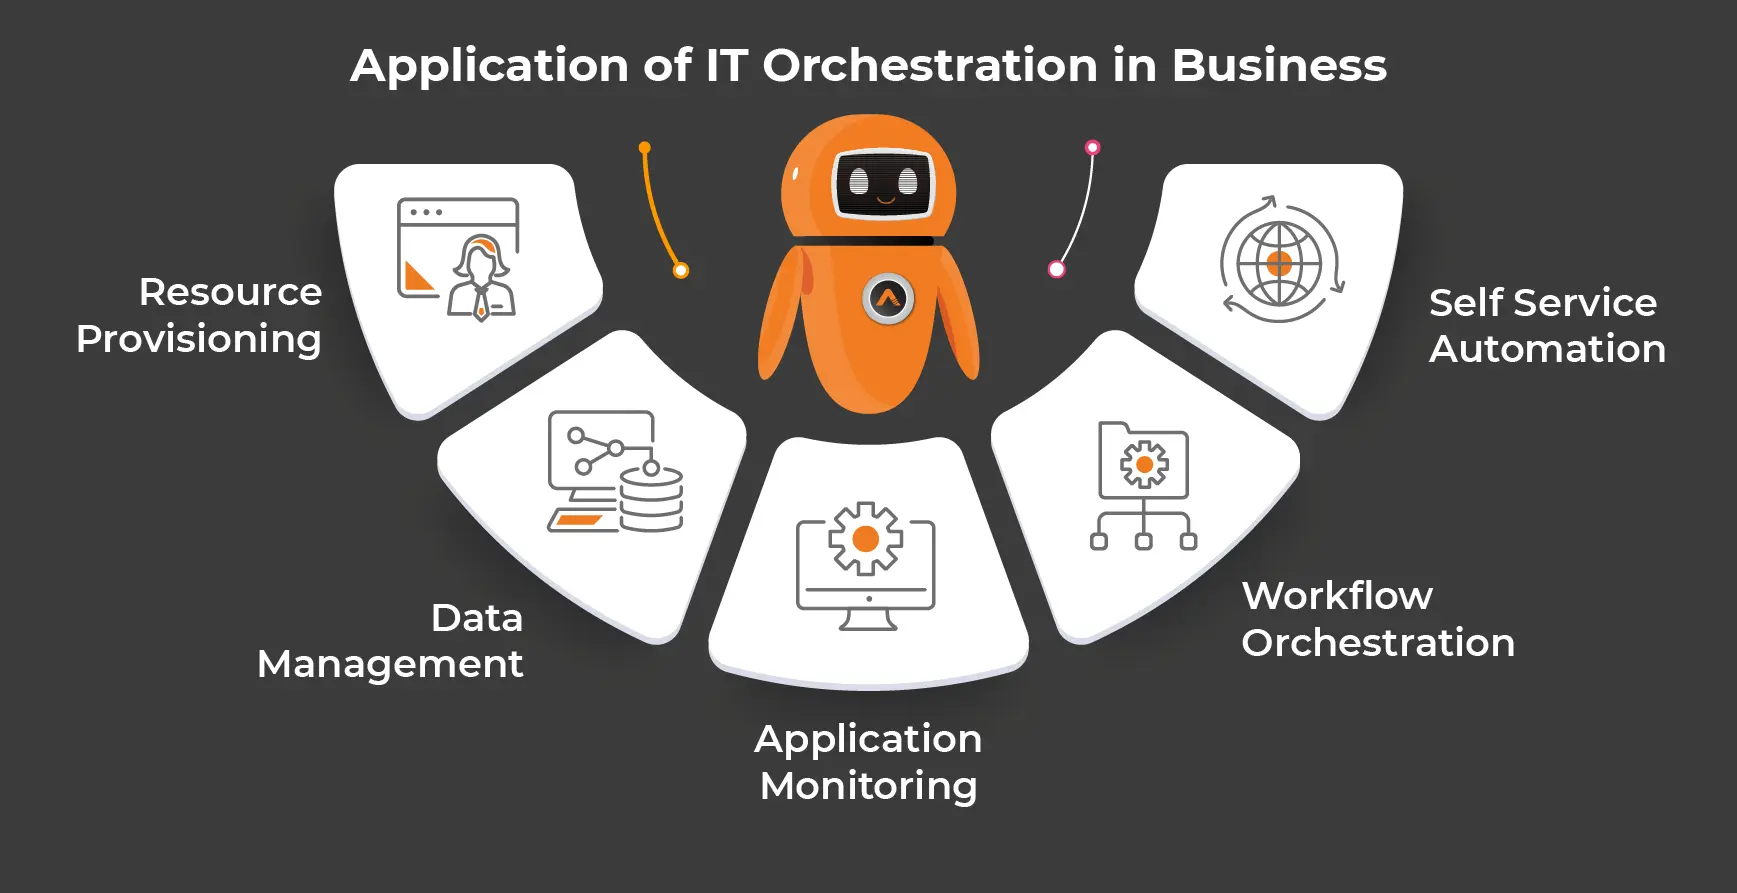 Application of IT Orchestration in Business